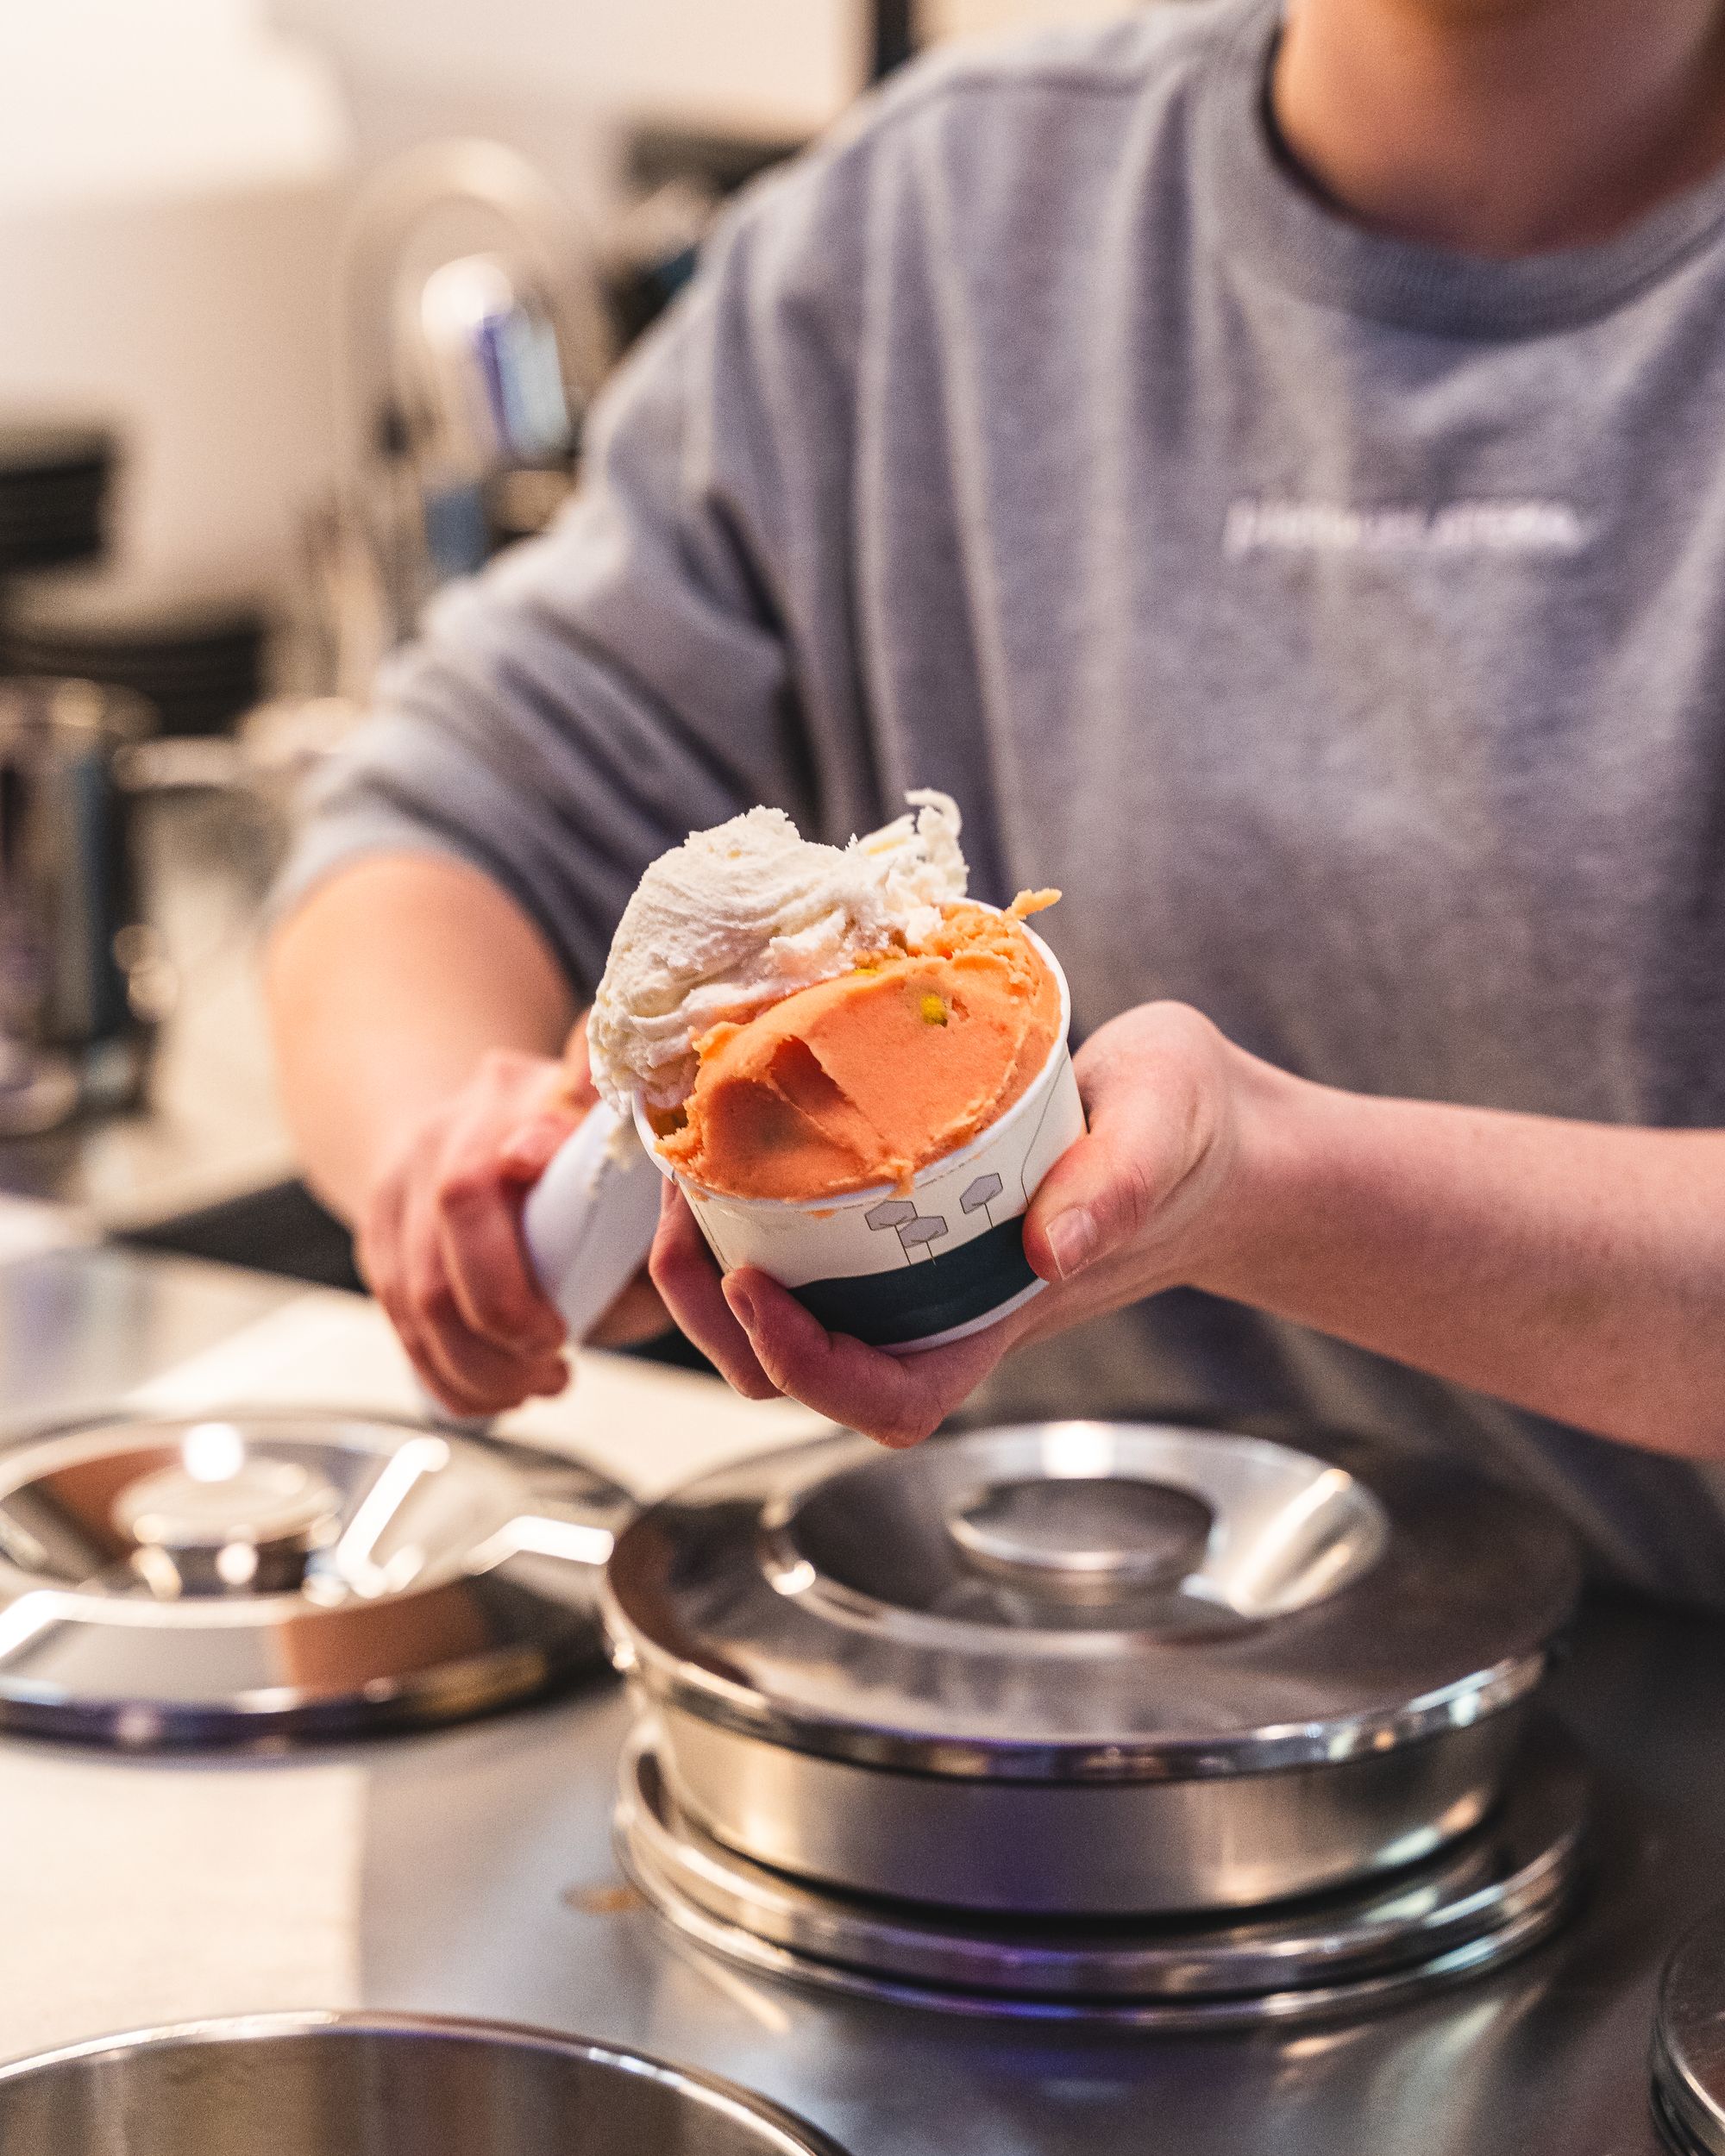 Hand scooping gelato into a cup